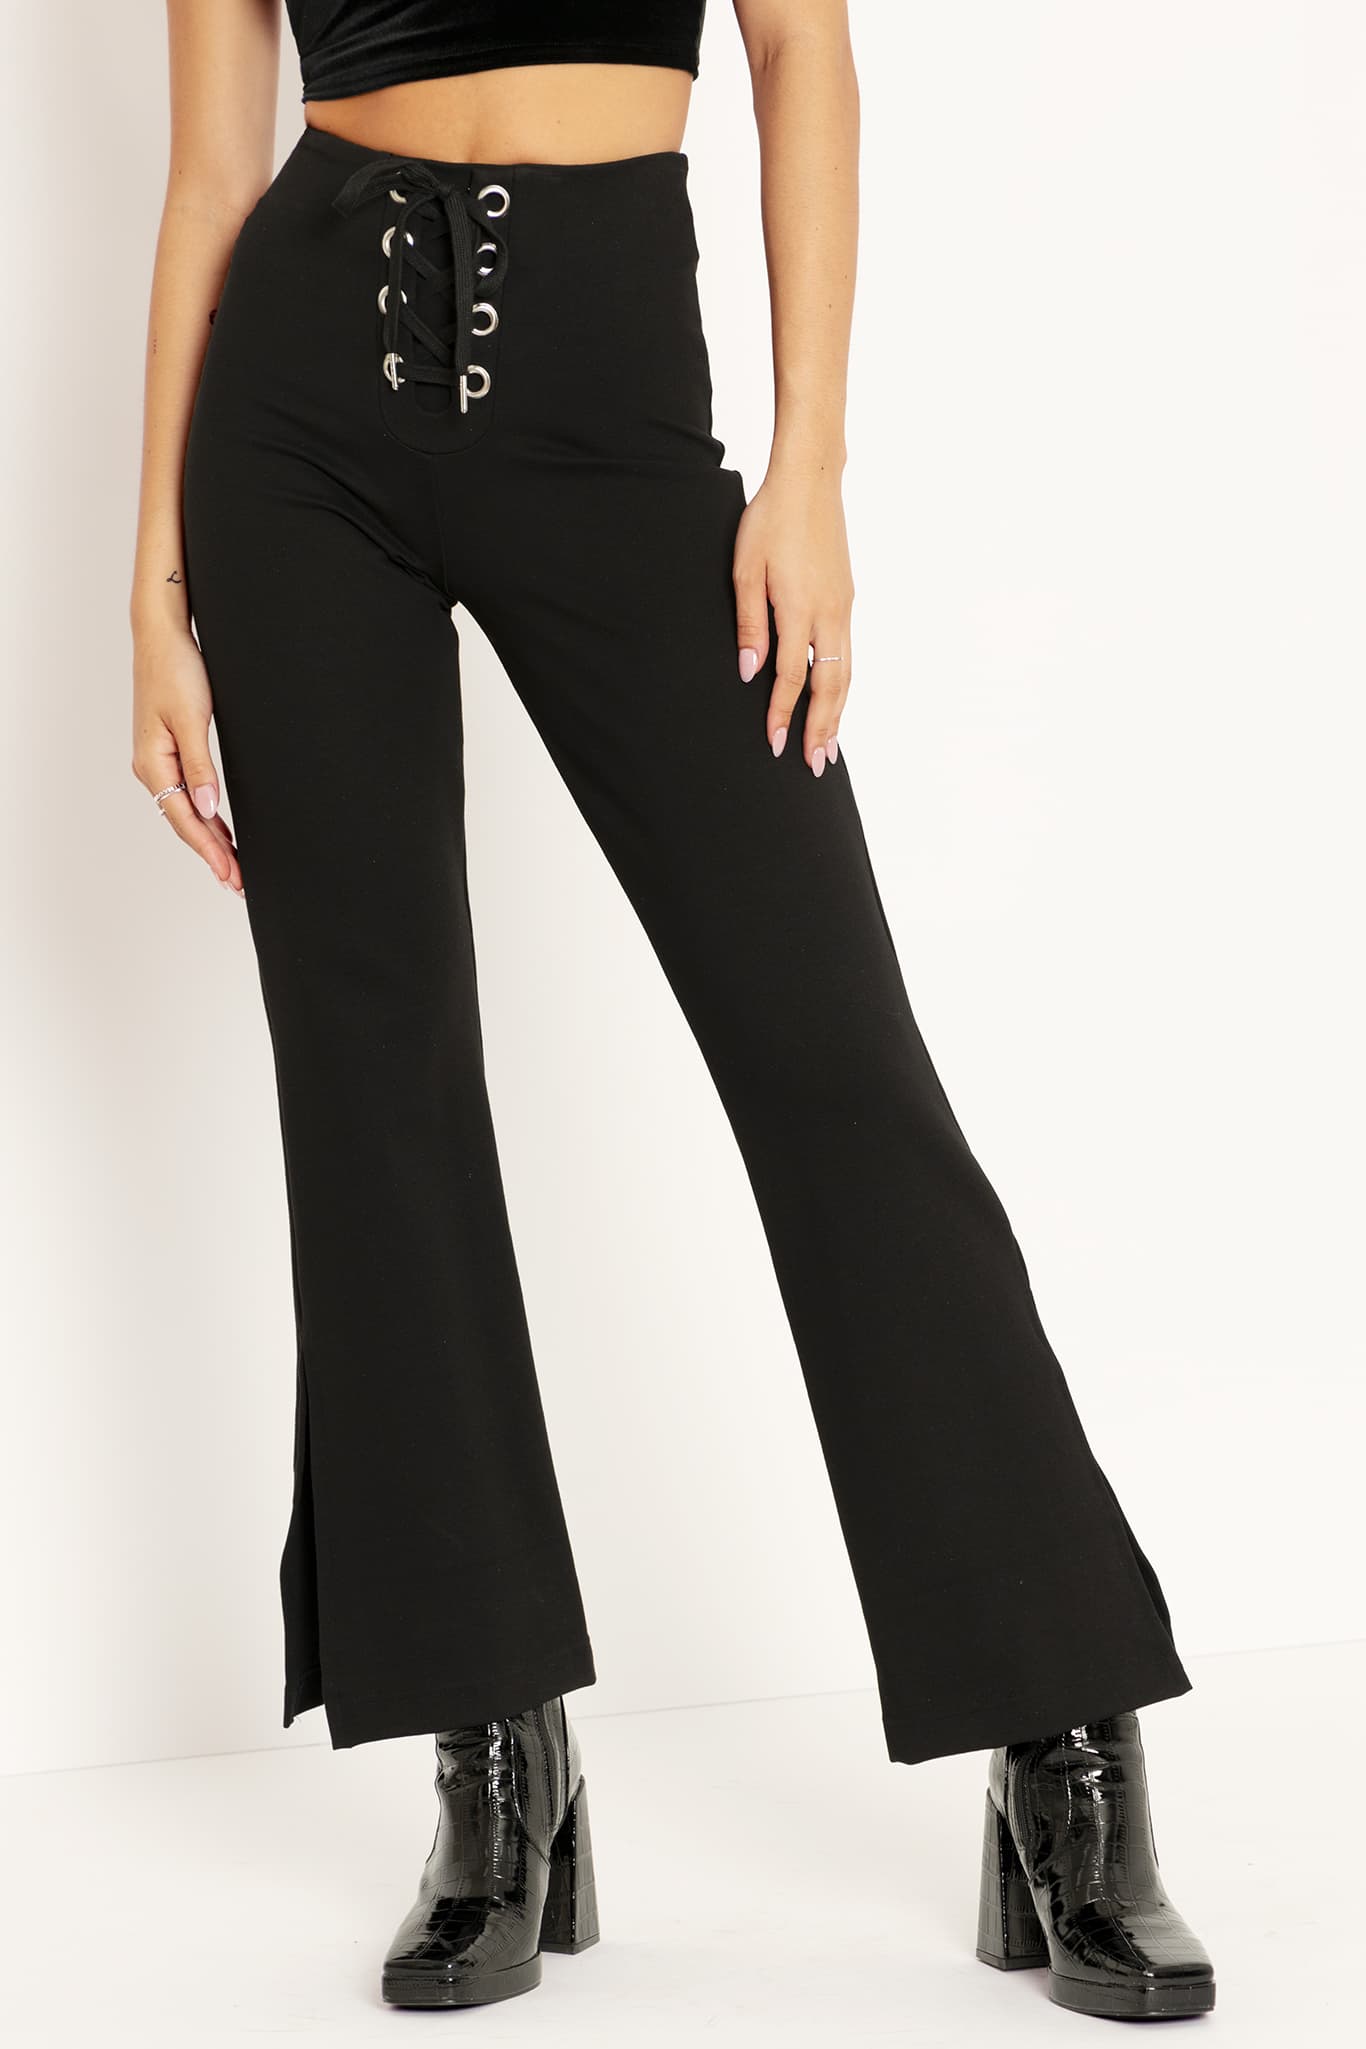 Topshop knot twist front flared pants in hibiscus print | ASOS